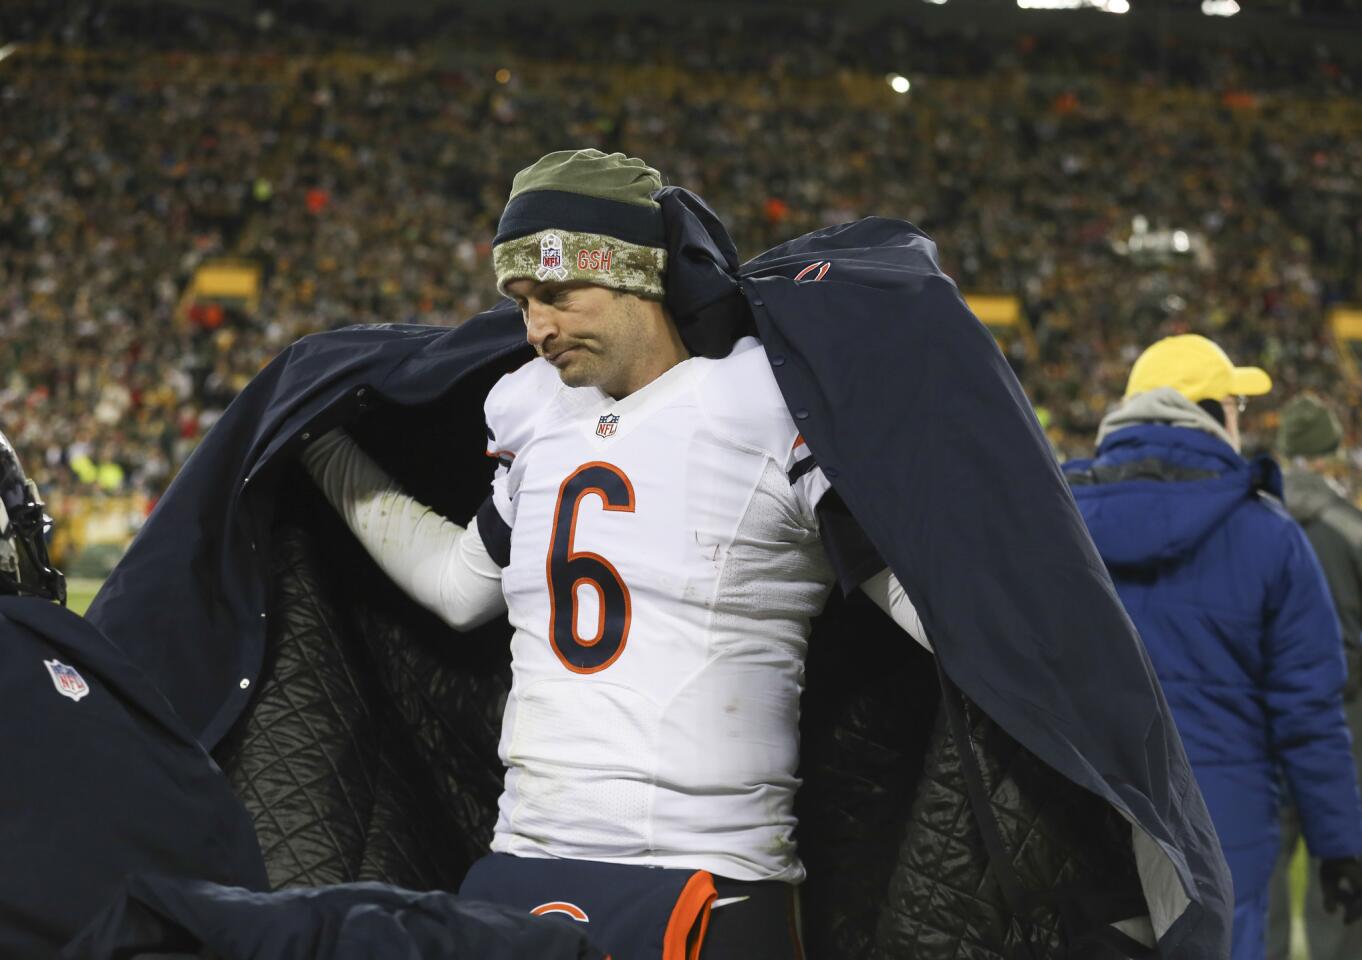 Bears quarterback Jay Cutler after being sacked by the Packers' Julius Peppers with less than two minutes left in the first half.